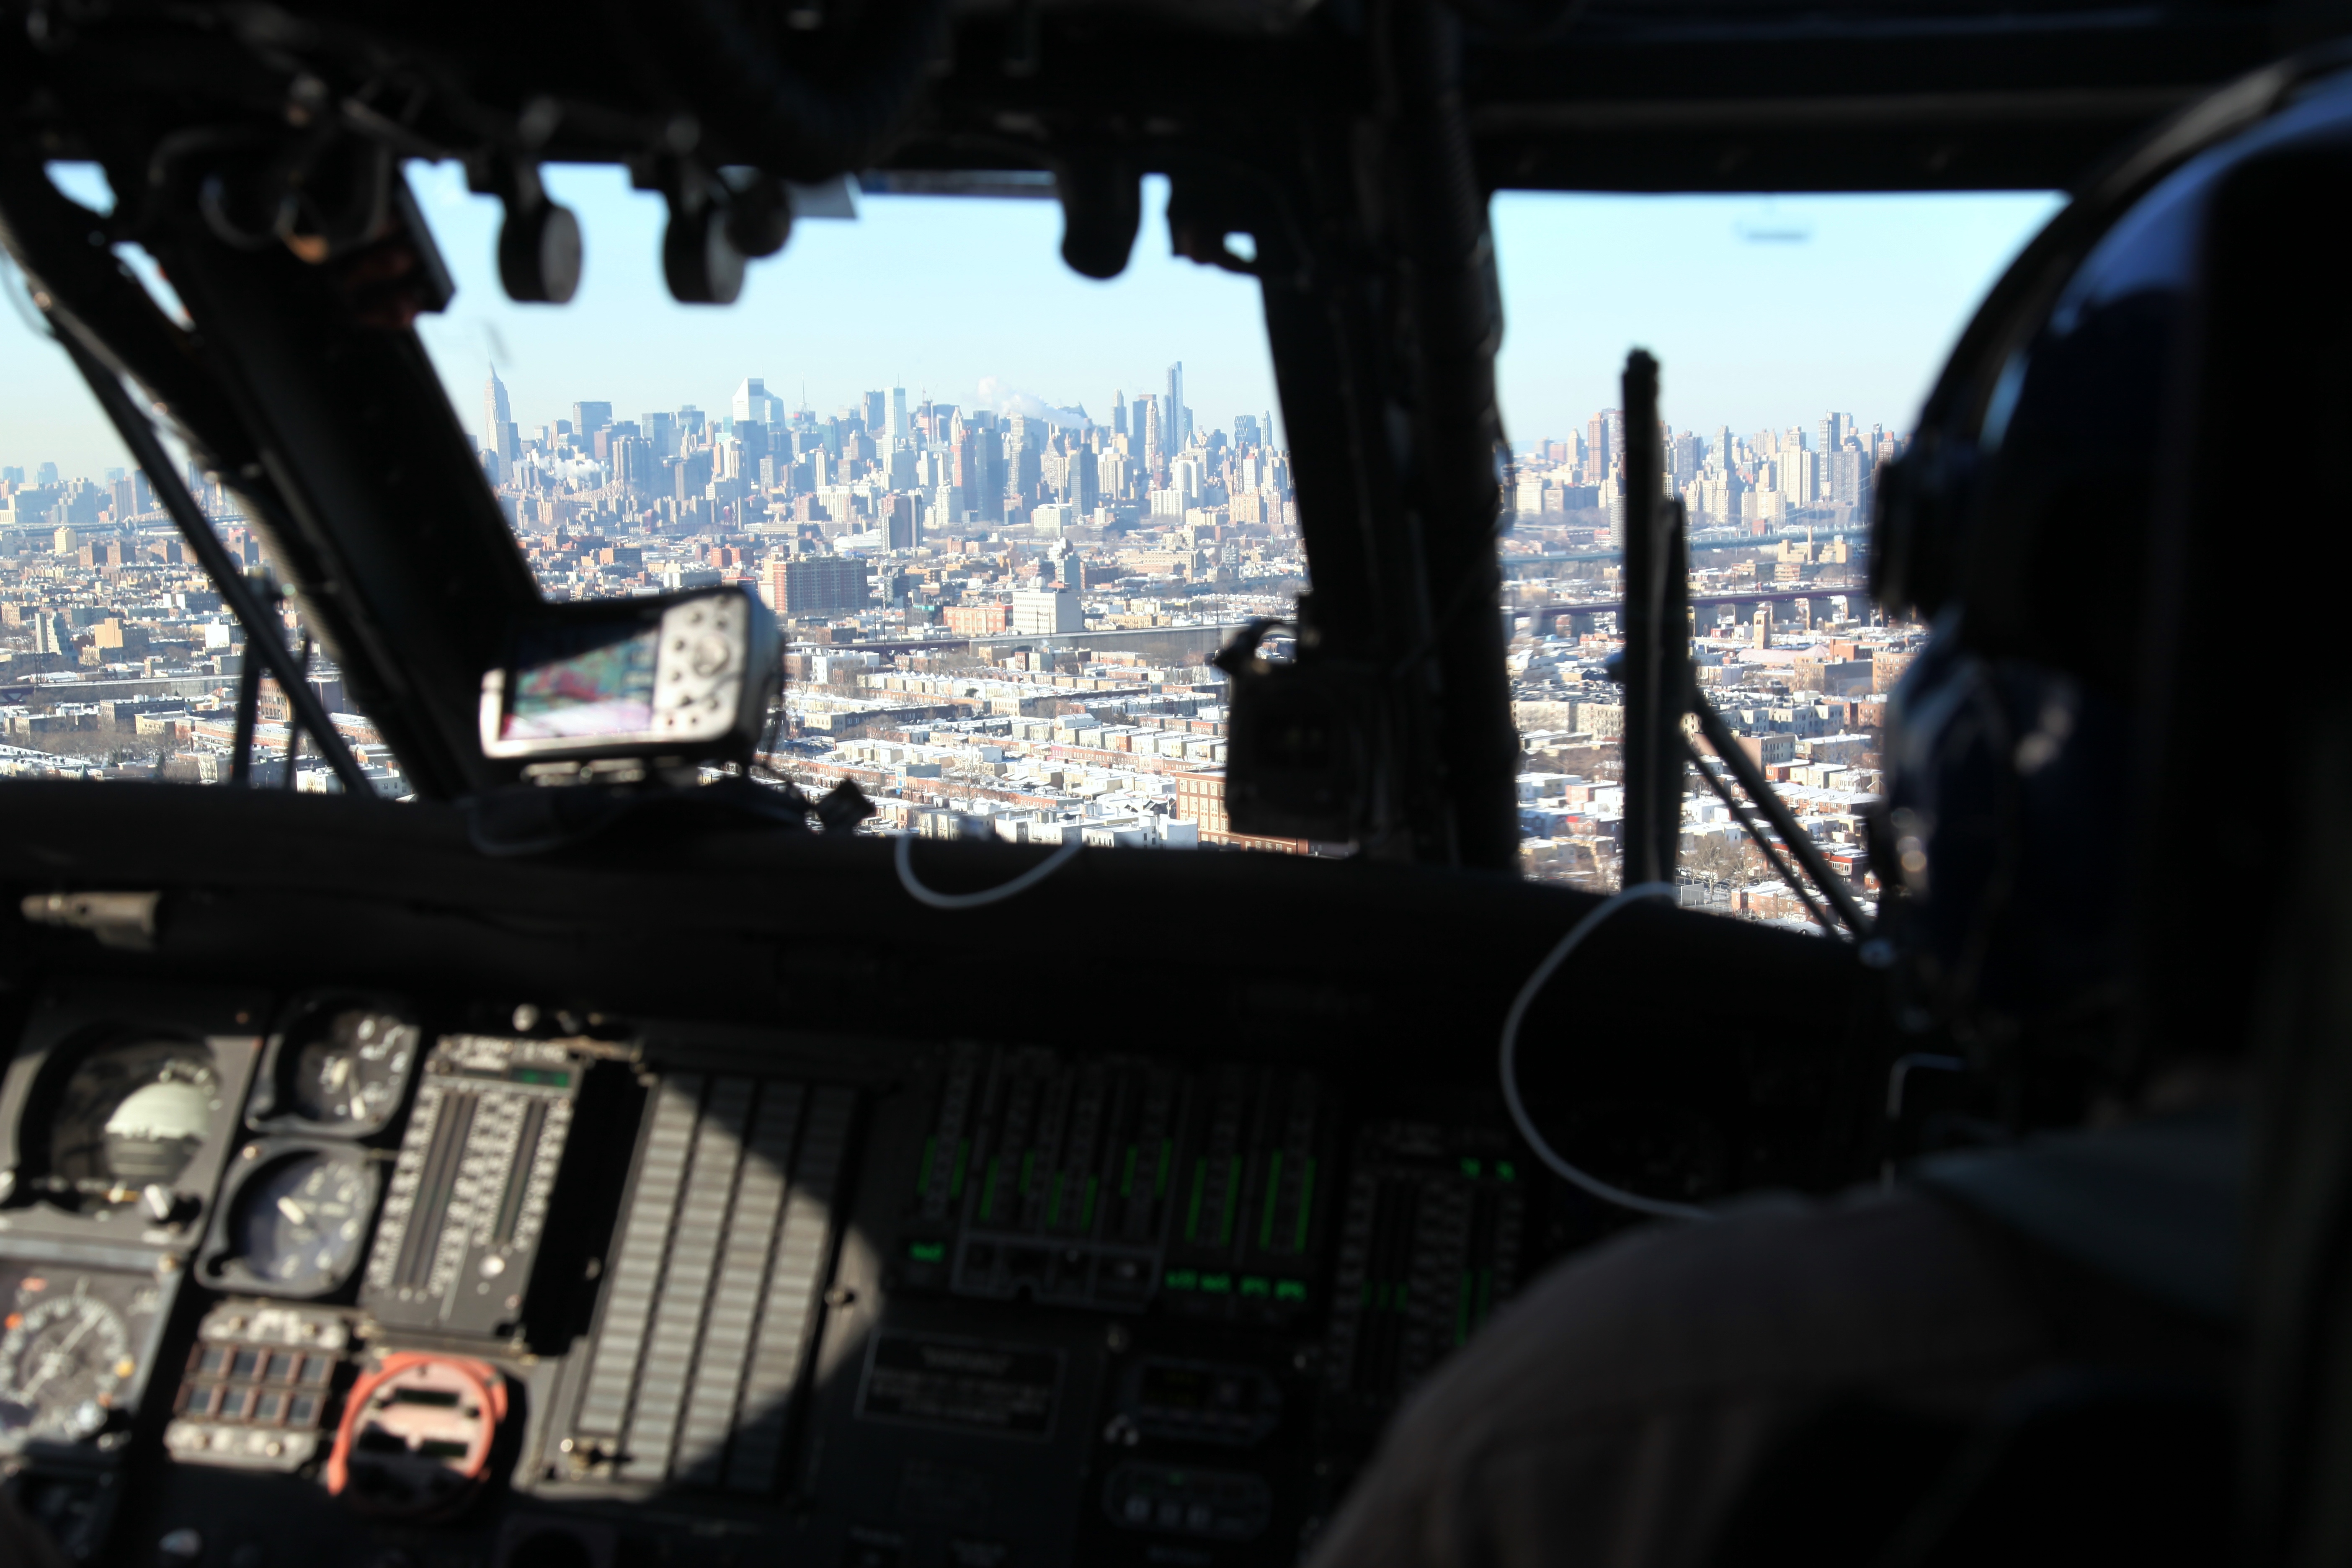 A CBP Black Hawk helicopter conducts a familiarization flight near New York City a few days prior to this year's Super Bowl.